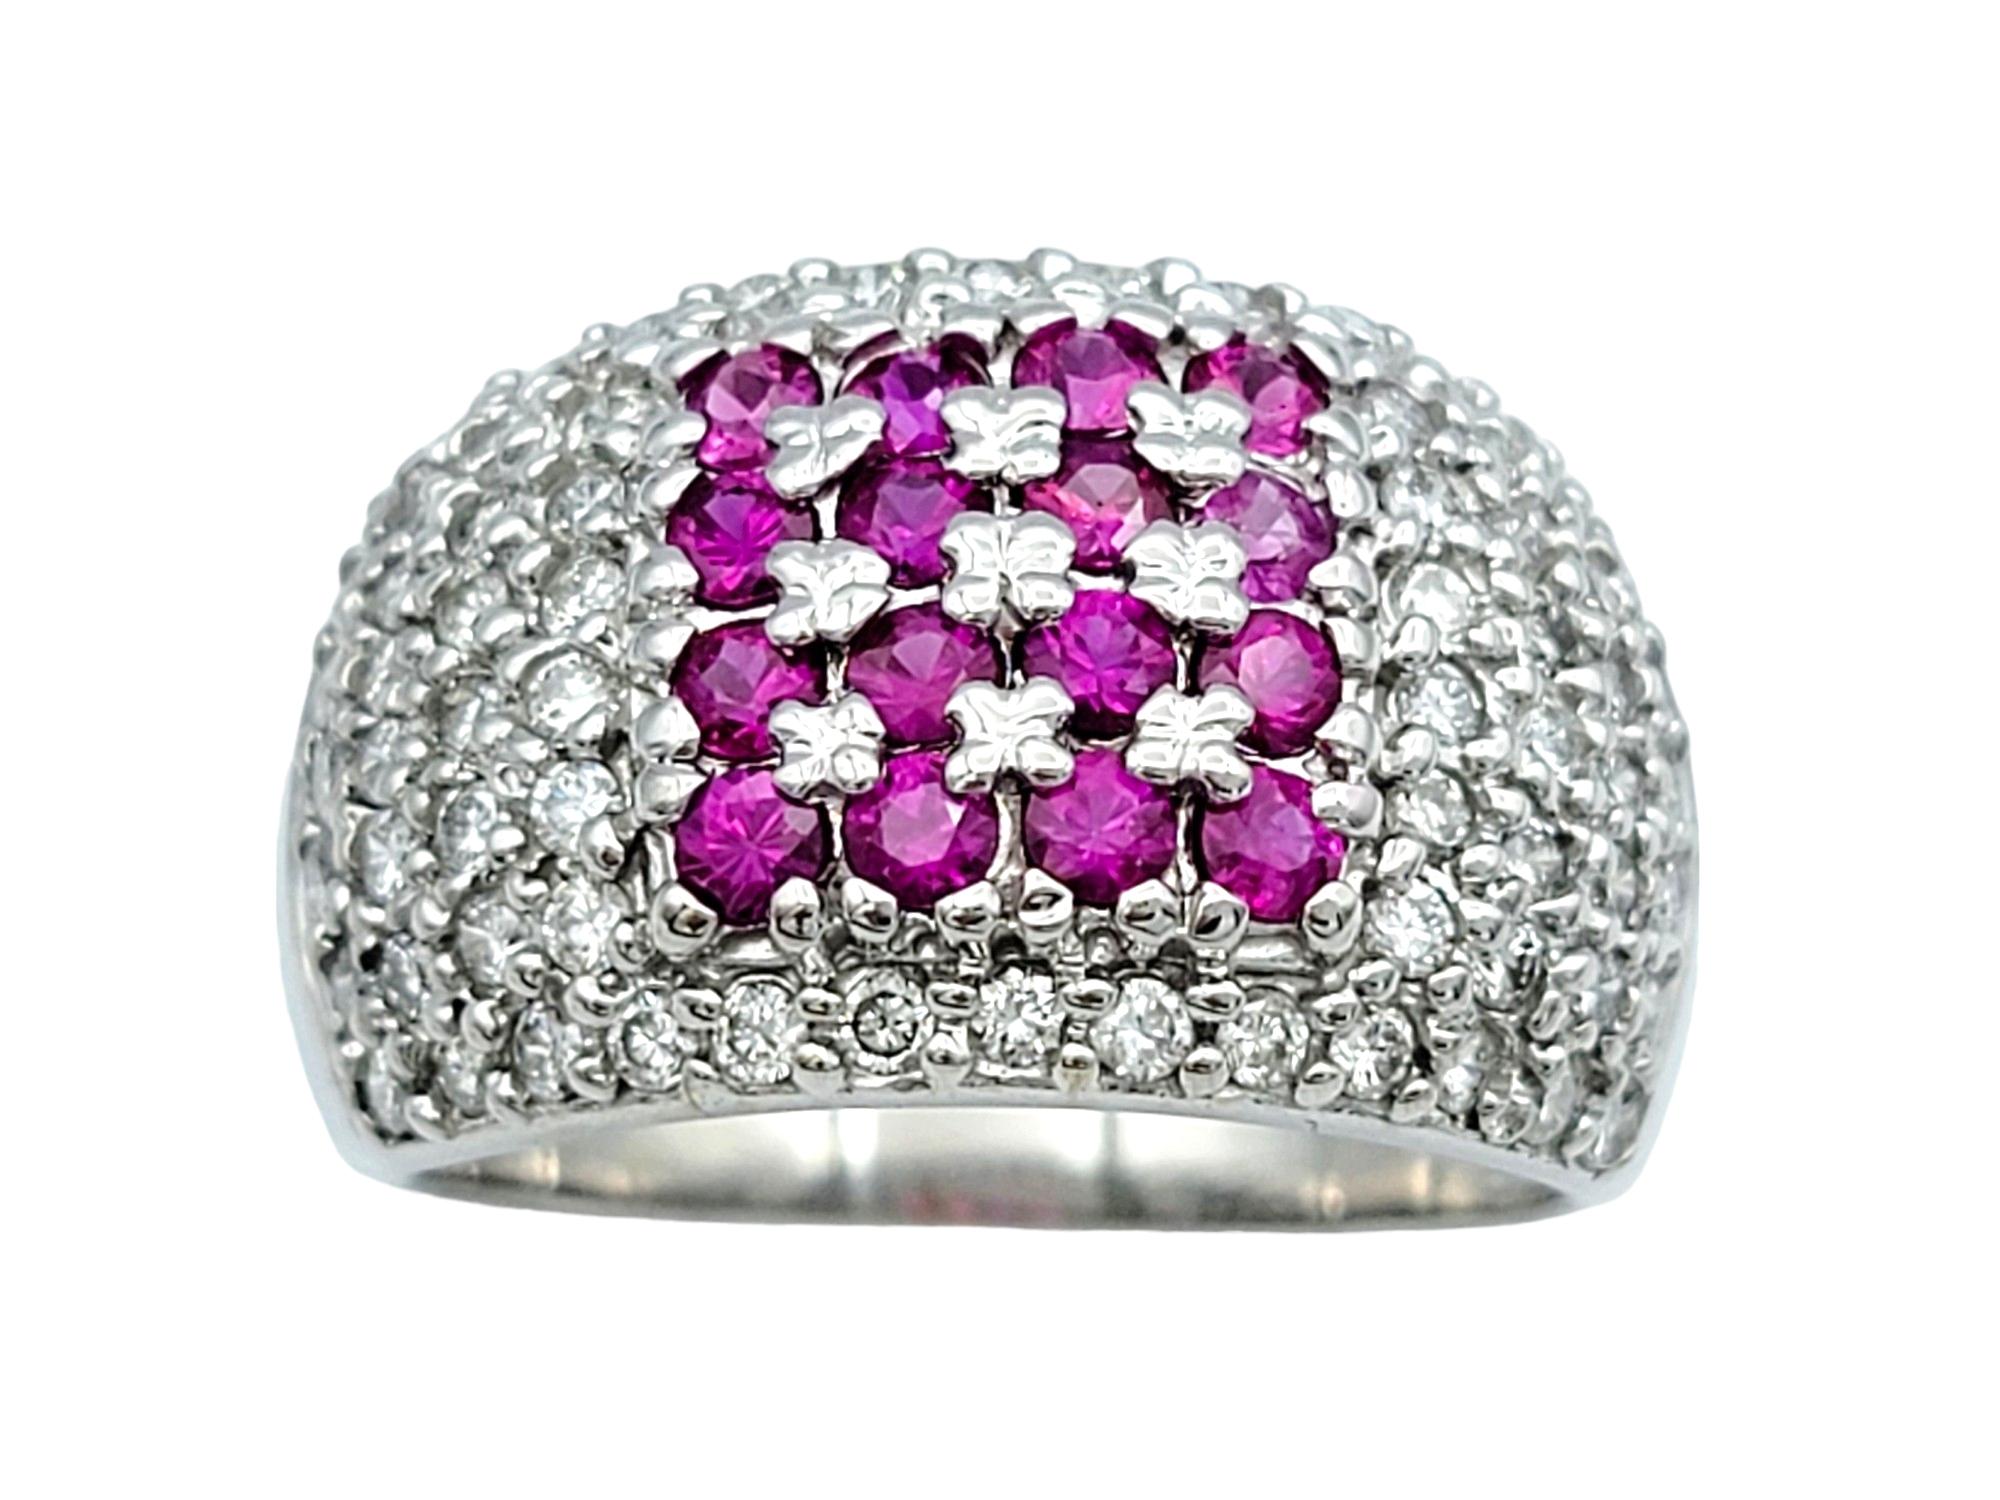 Ring Size: 8

This stunning band ring features a captivating blend of pink sapphires and diamonds, set in luxurious 14 karat white gold. At the center of the ring, a square formation of round pink sapphires creates a bold and eye-catching focal